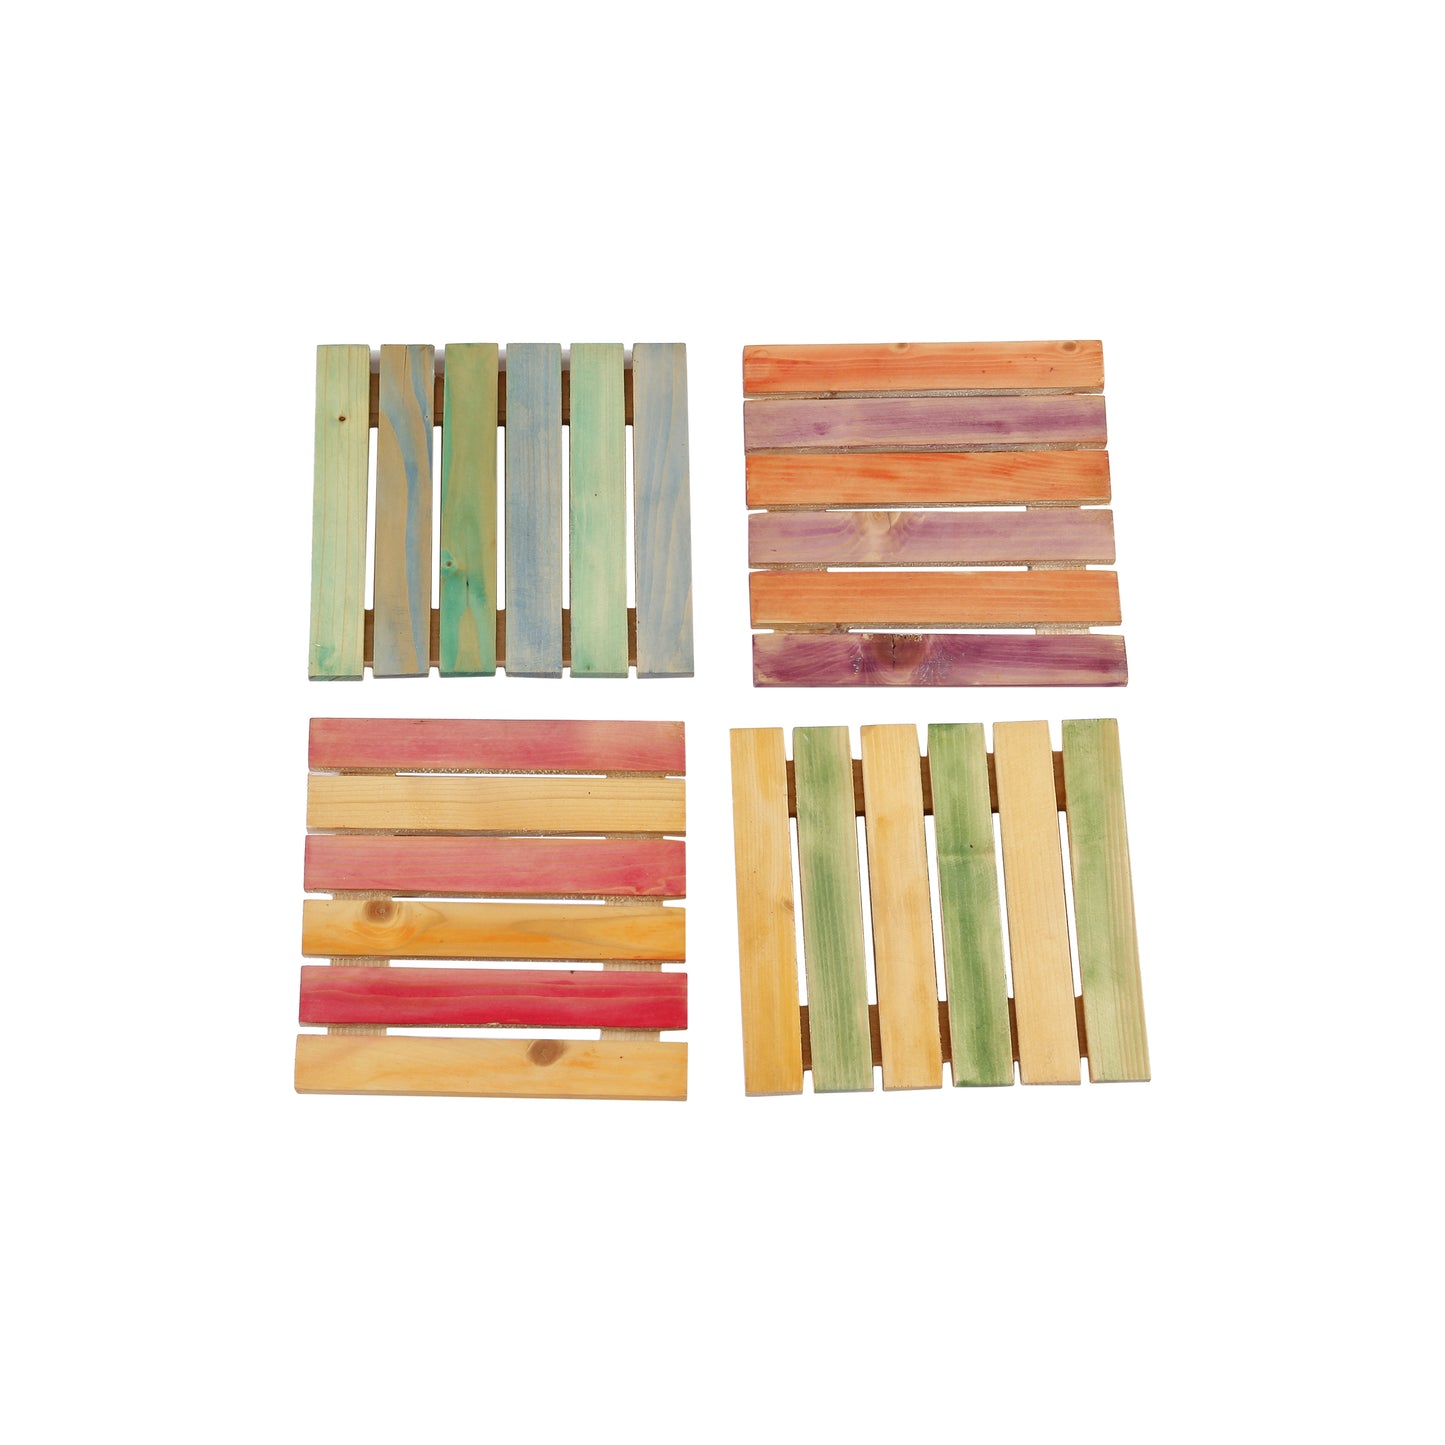 A Tiny Mistake Pine Wood Trivets, Place Mats, Table Accessory, Serveware, Set of 4 Trivets, Coasters for The Table, 15.9 x 15.3 x 1.5 cm (Multicoloured)